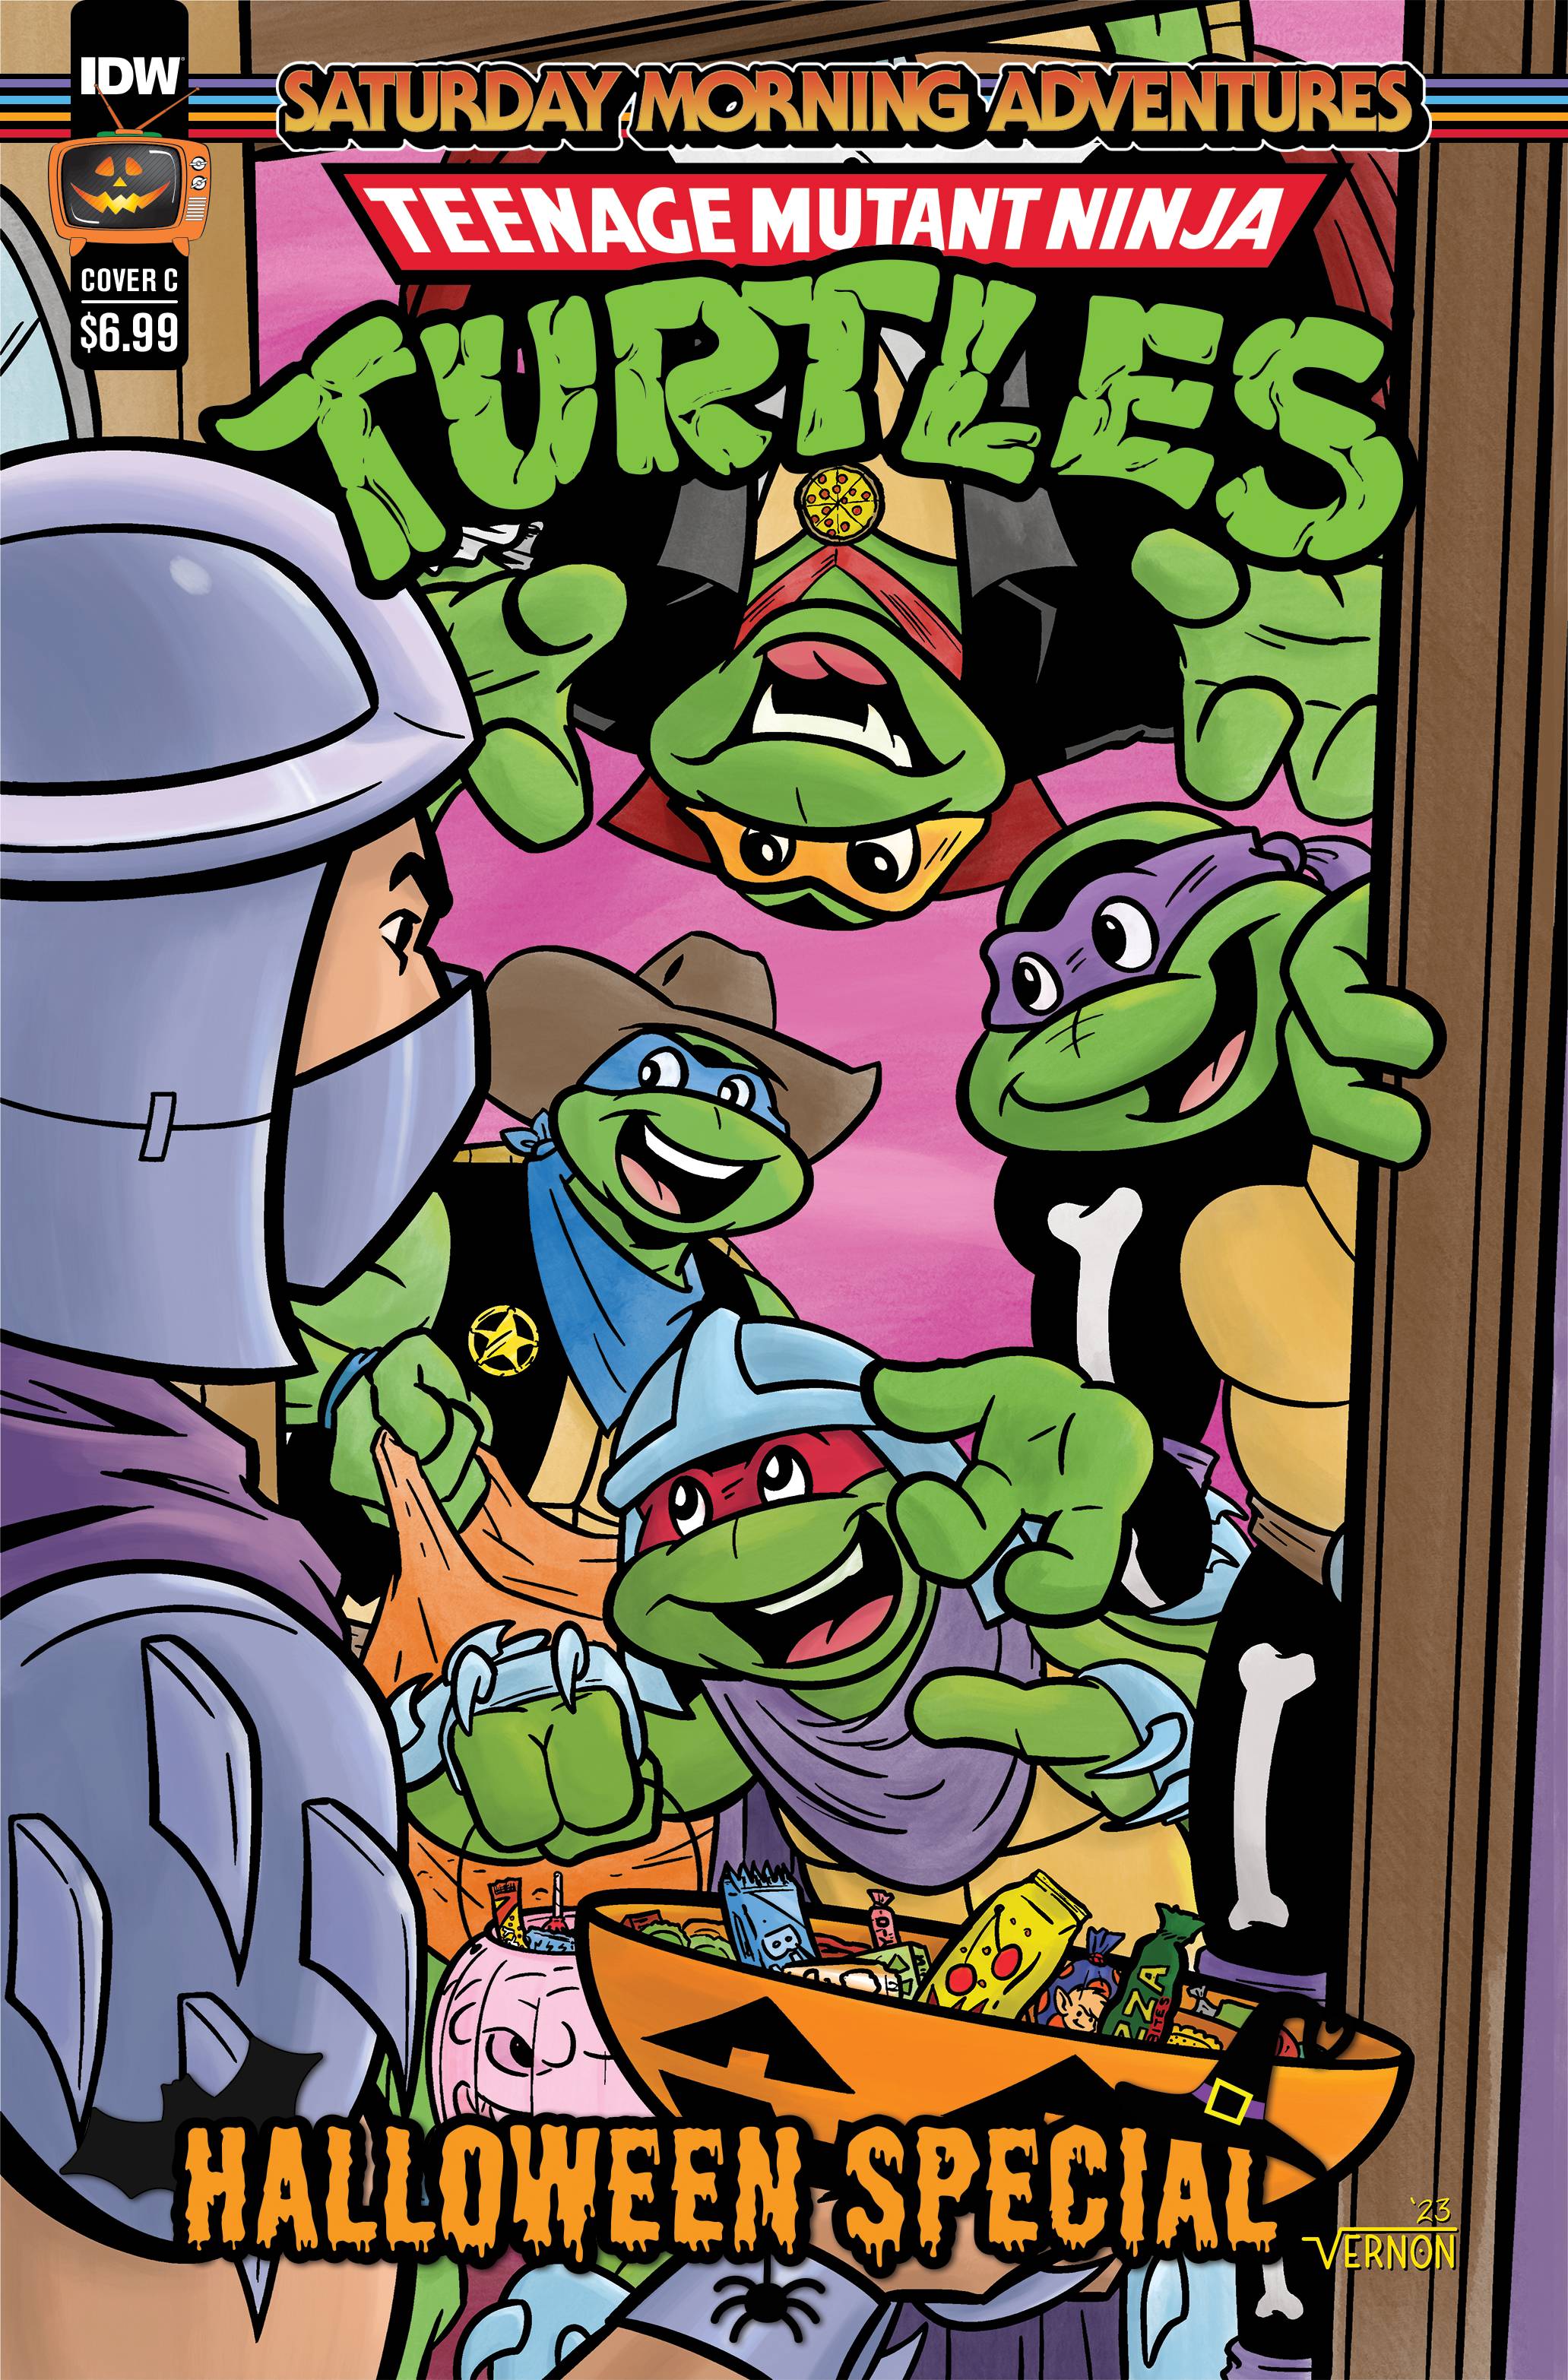 TMNT Saturday Morning Adventures Halloween Special from IDW